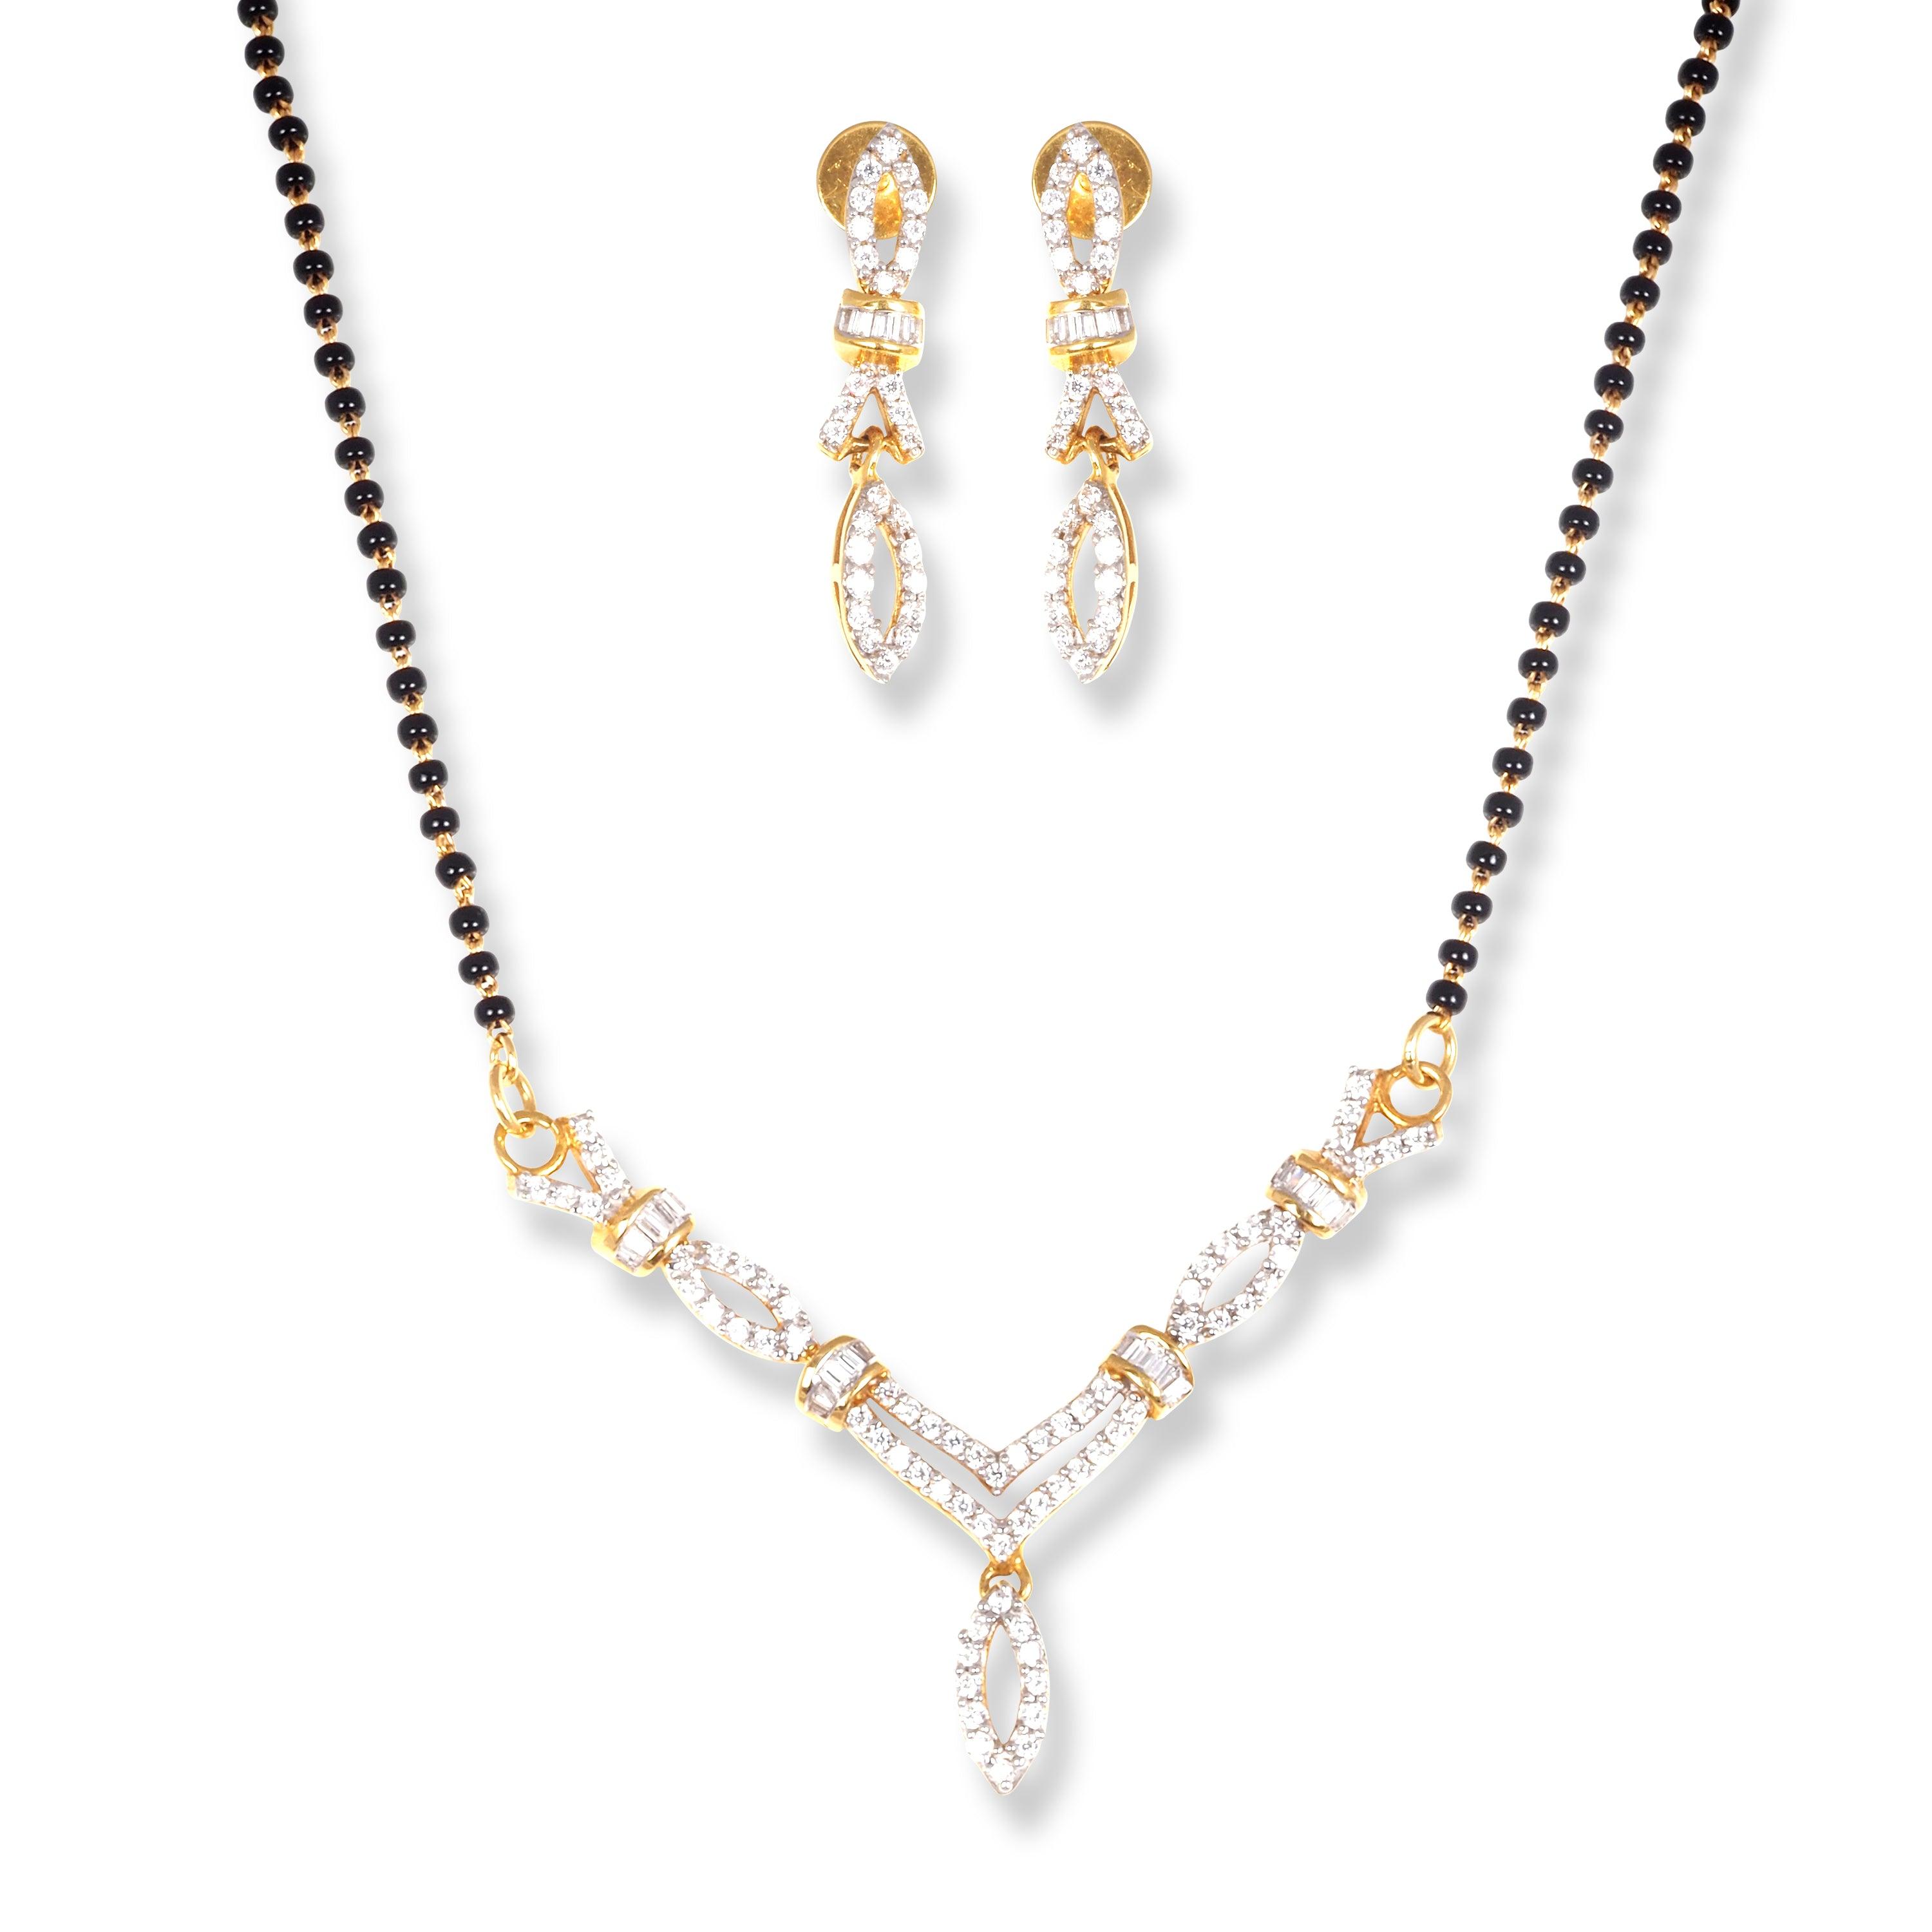 22ct Gold Mangal Sutra Set with Cubic Zirconia Stones and Lobster Clasp (Necklace + Drop Earrings) - Minar Jewellers